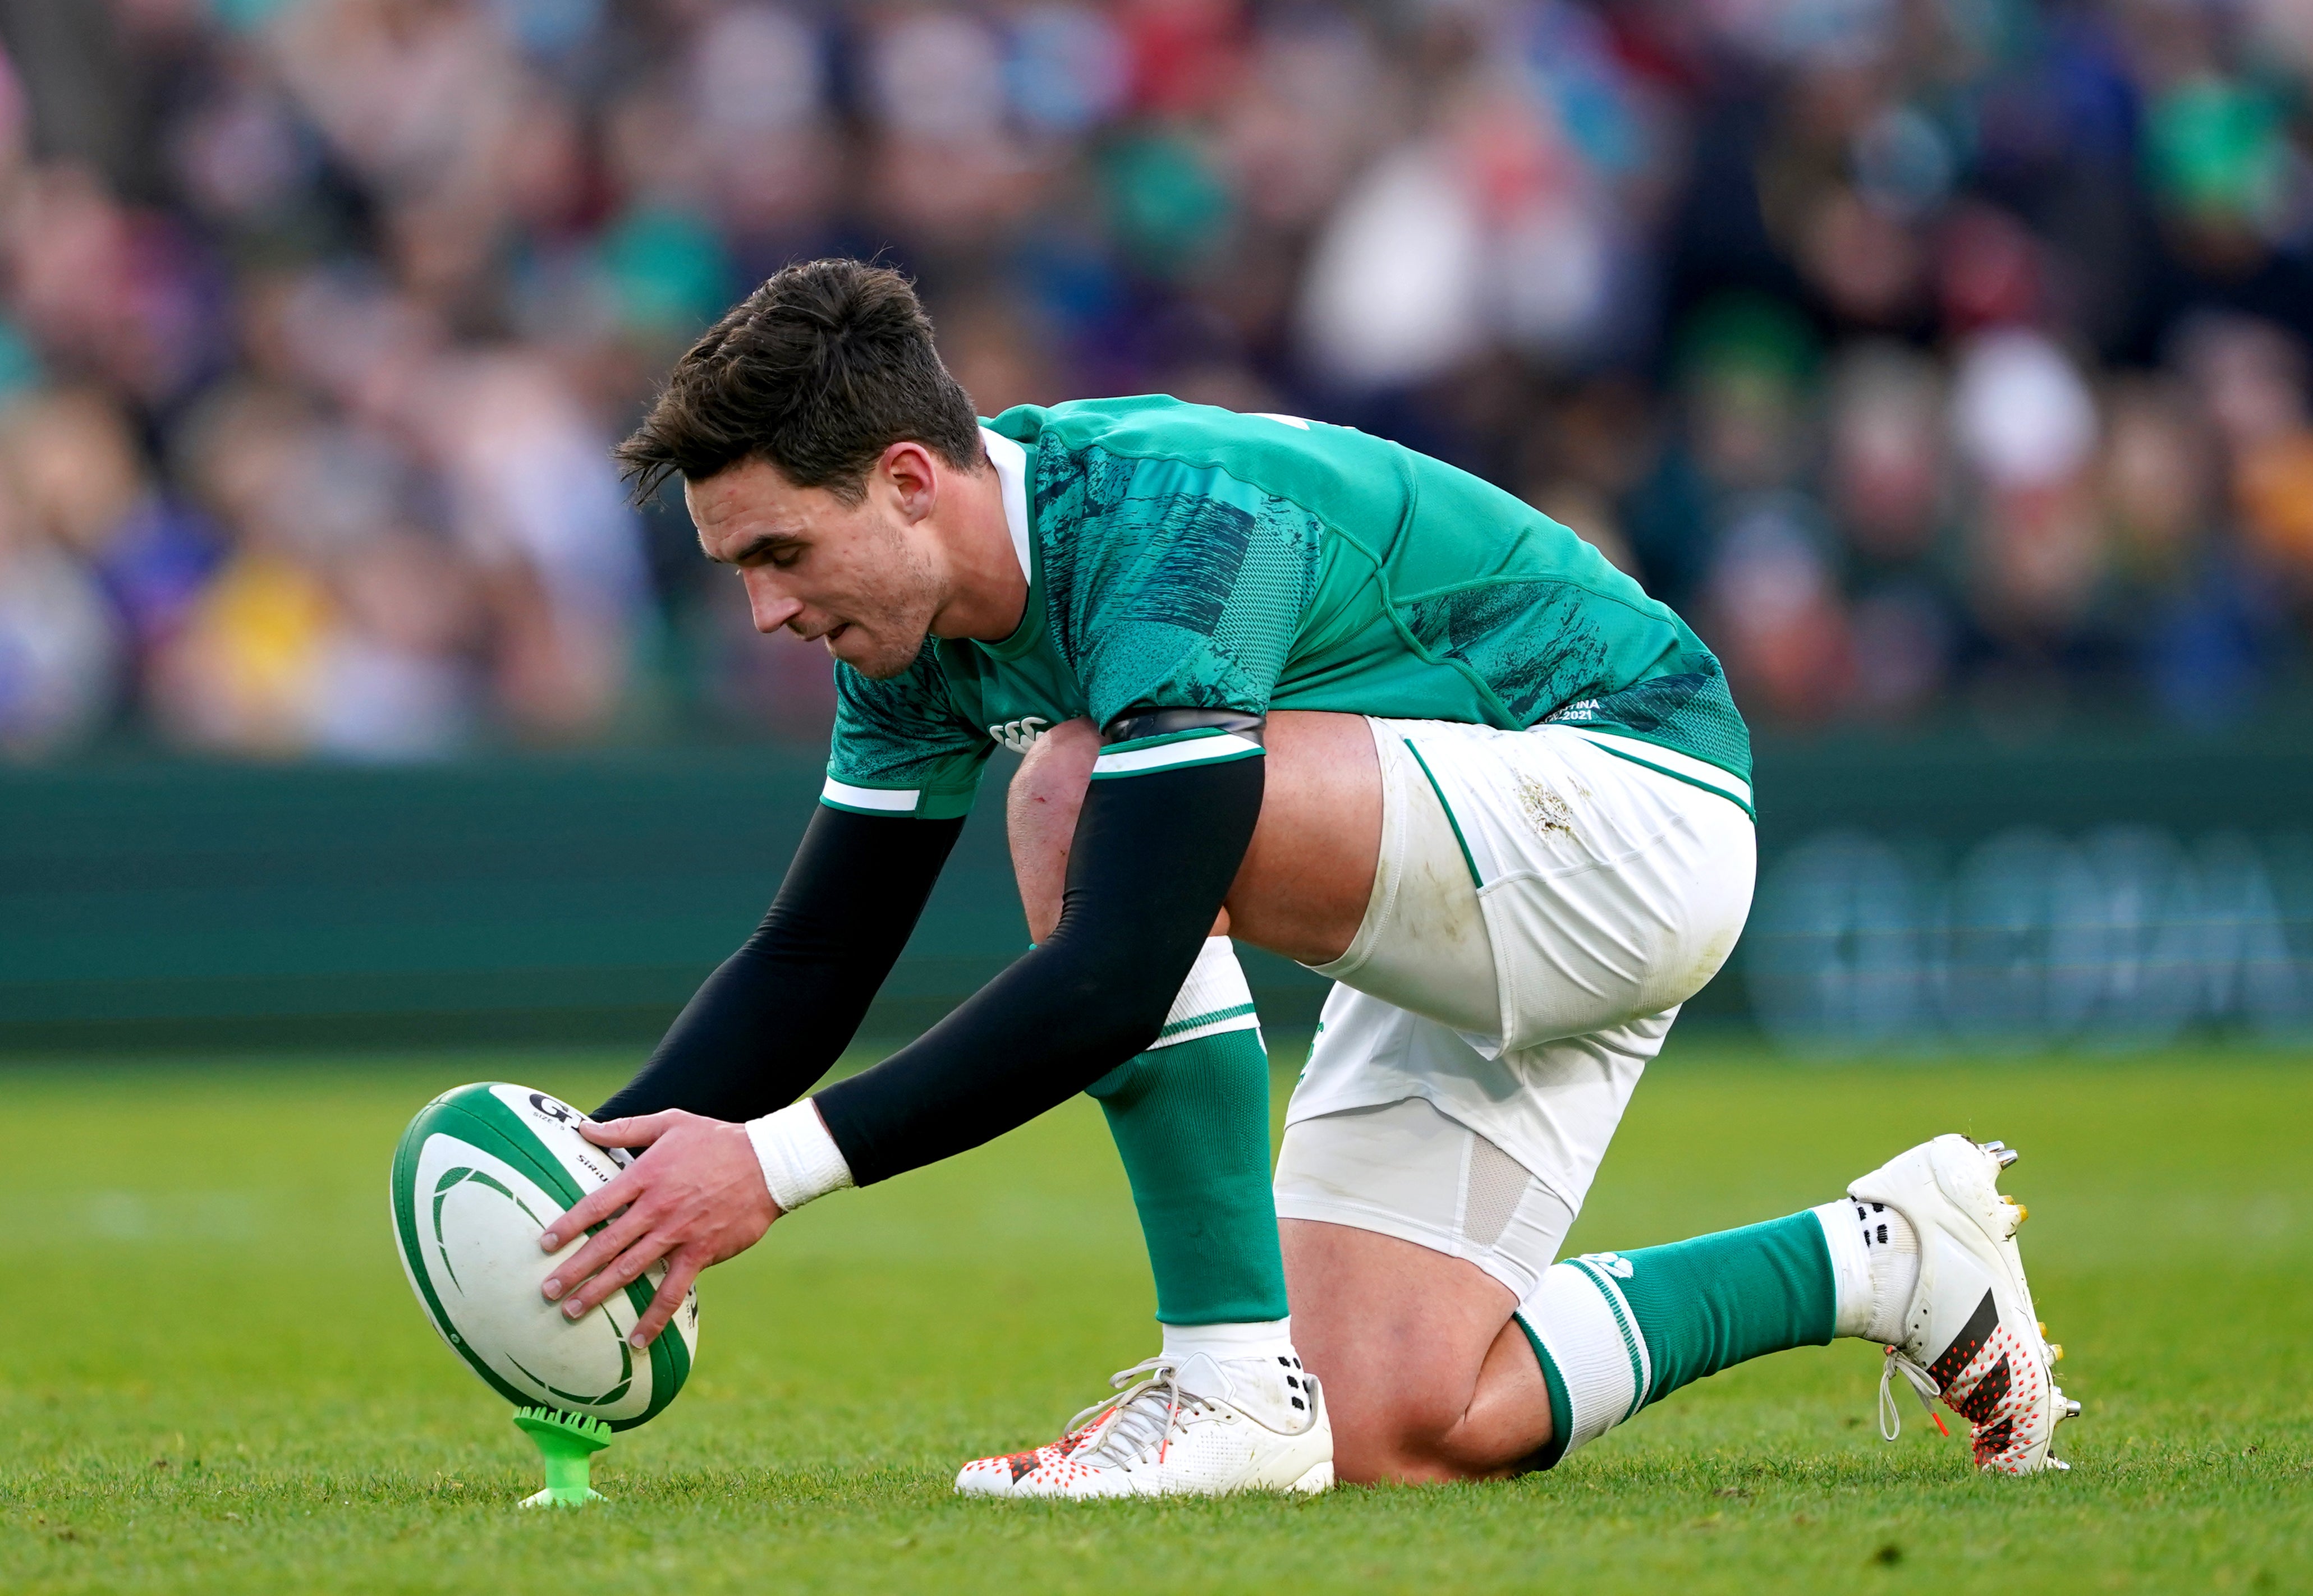 Joey Carbery, pictured, has retained Ireland’s fly-half role ahead of captain Johnny Sexton (Brian Lawless/PA)